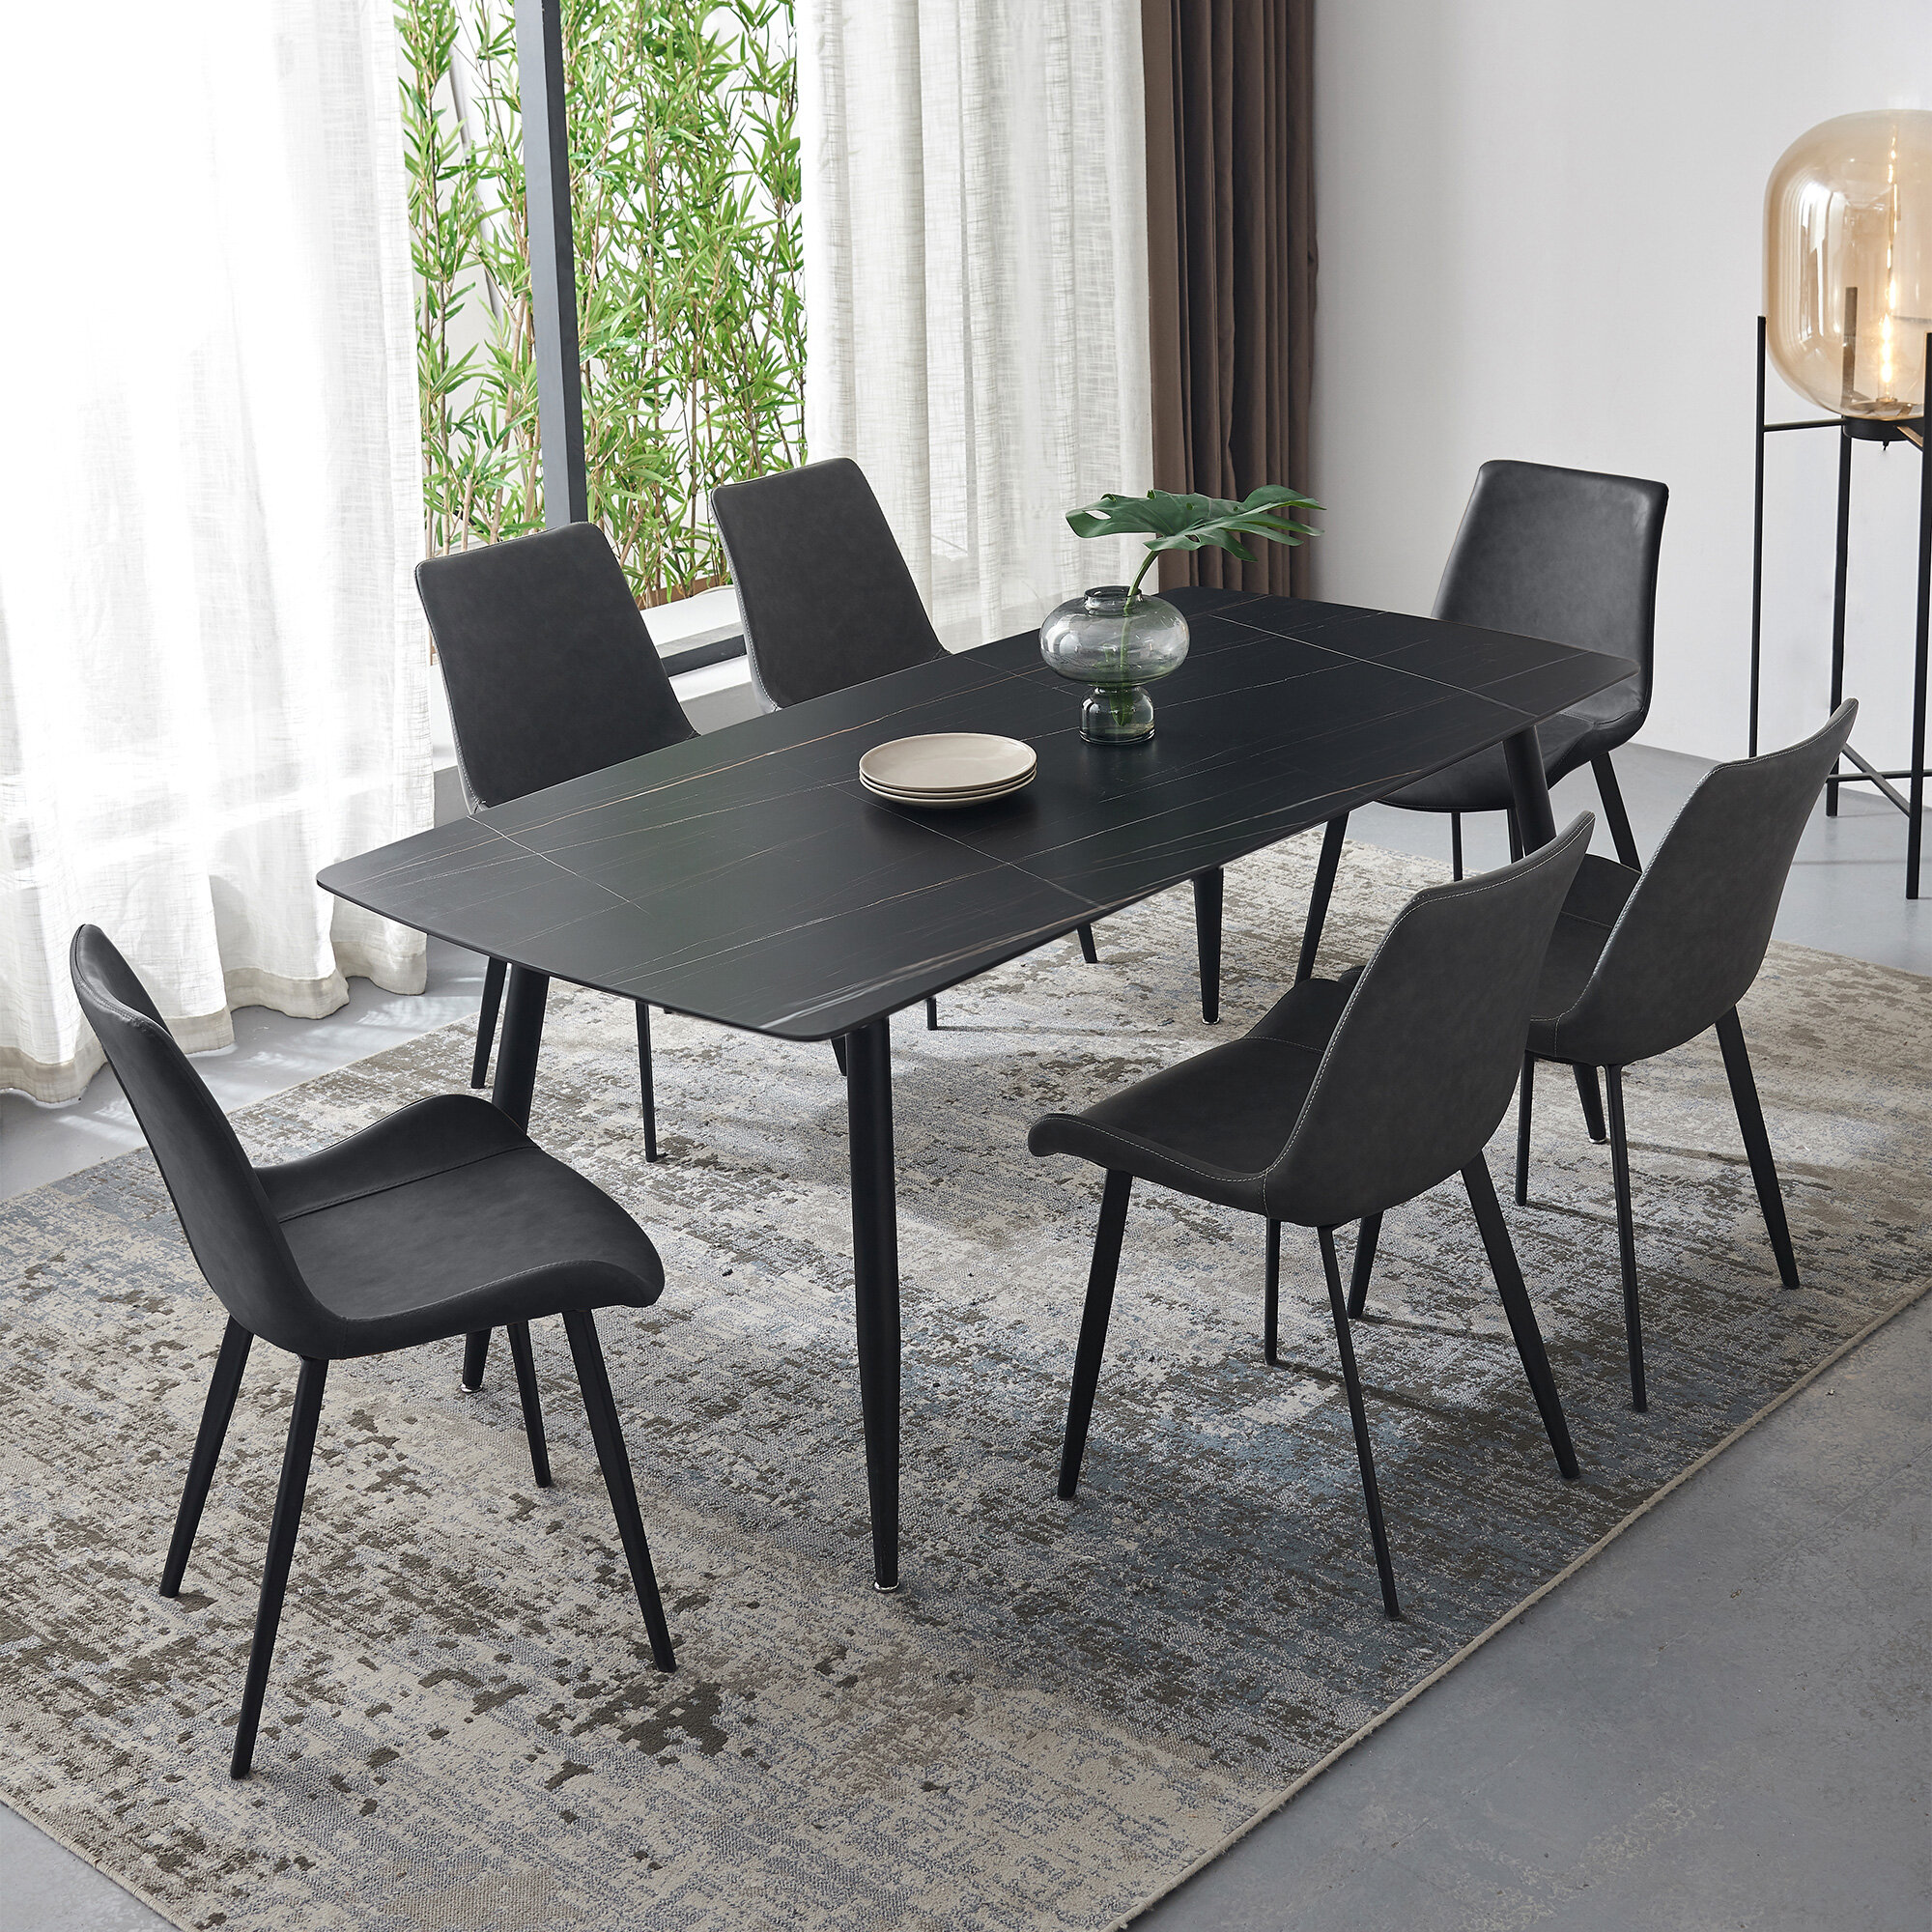 George Oliver Catello 6 - Person Dining Set & Reviews | Wayfair